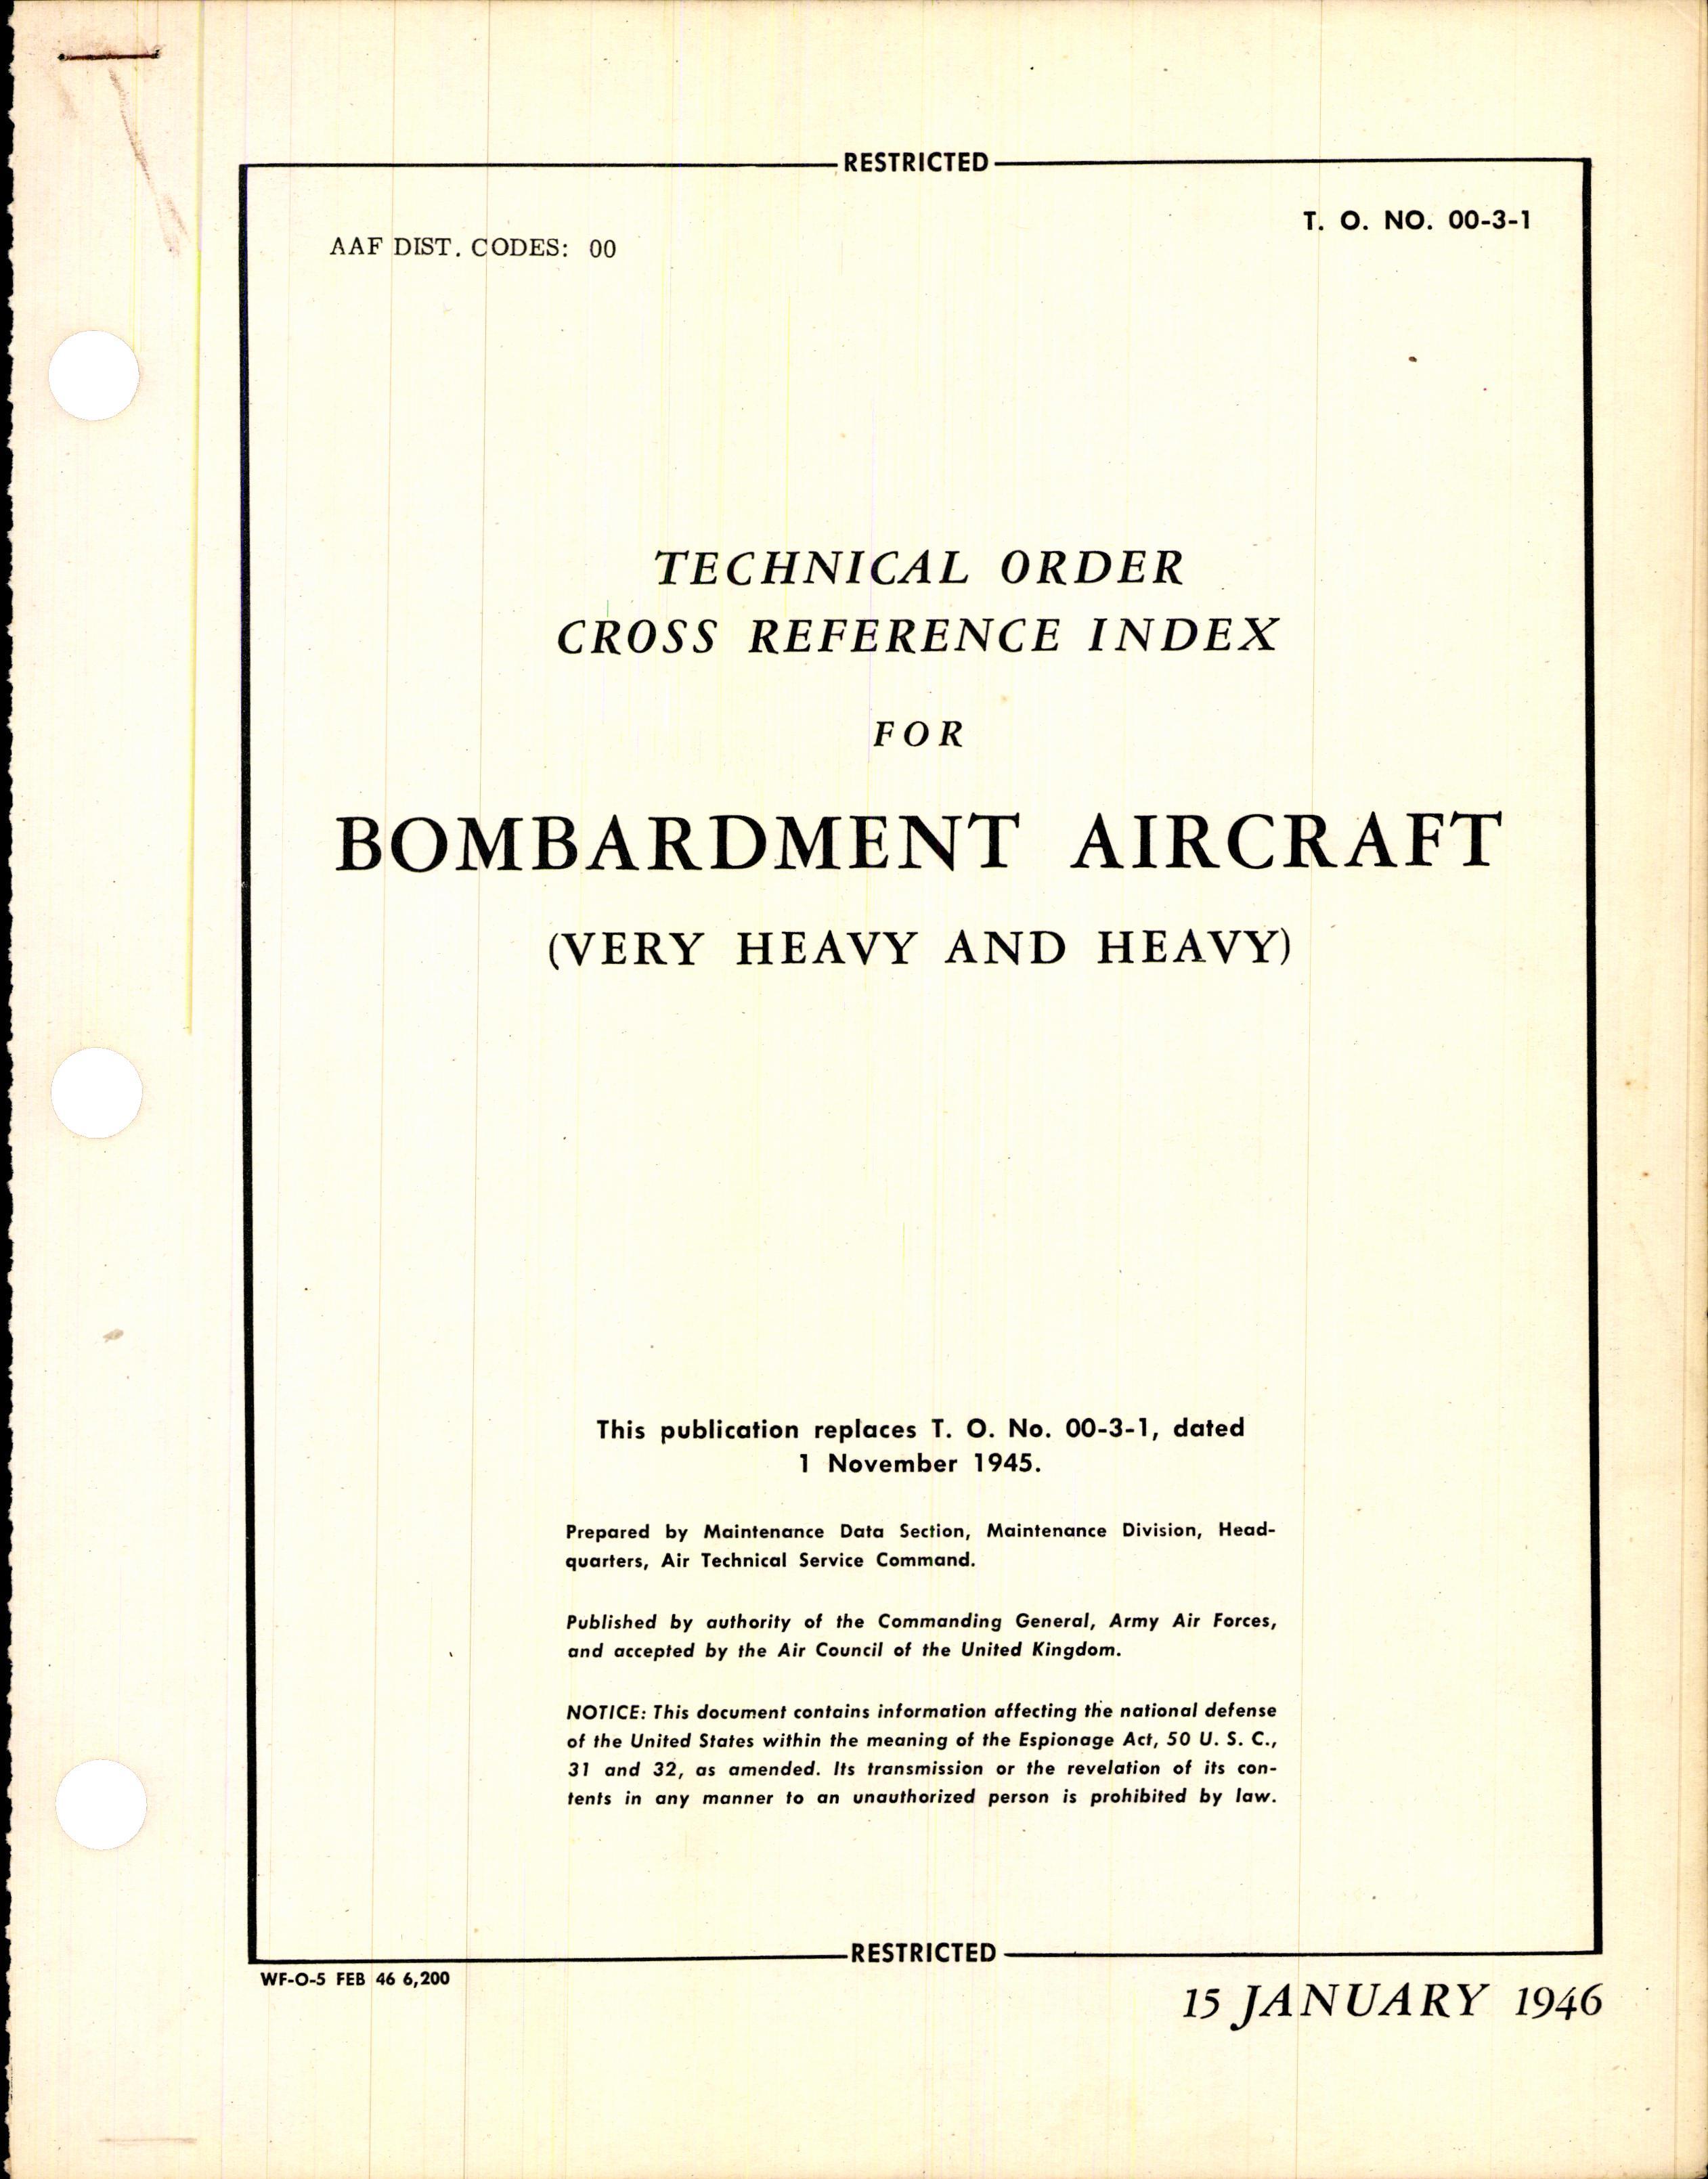 Sample page 1 from AirCorps Library document: Index for Bombardment Aircraft (Very Heavy and Heavy)